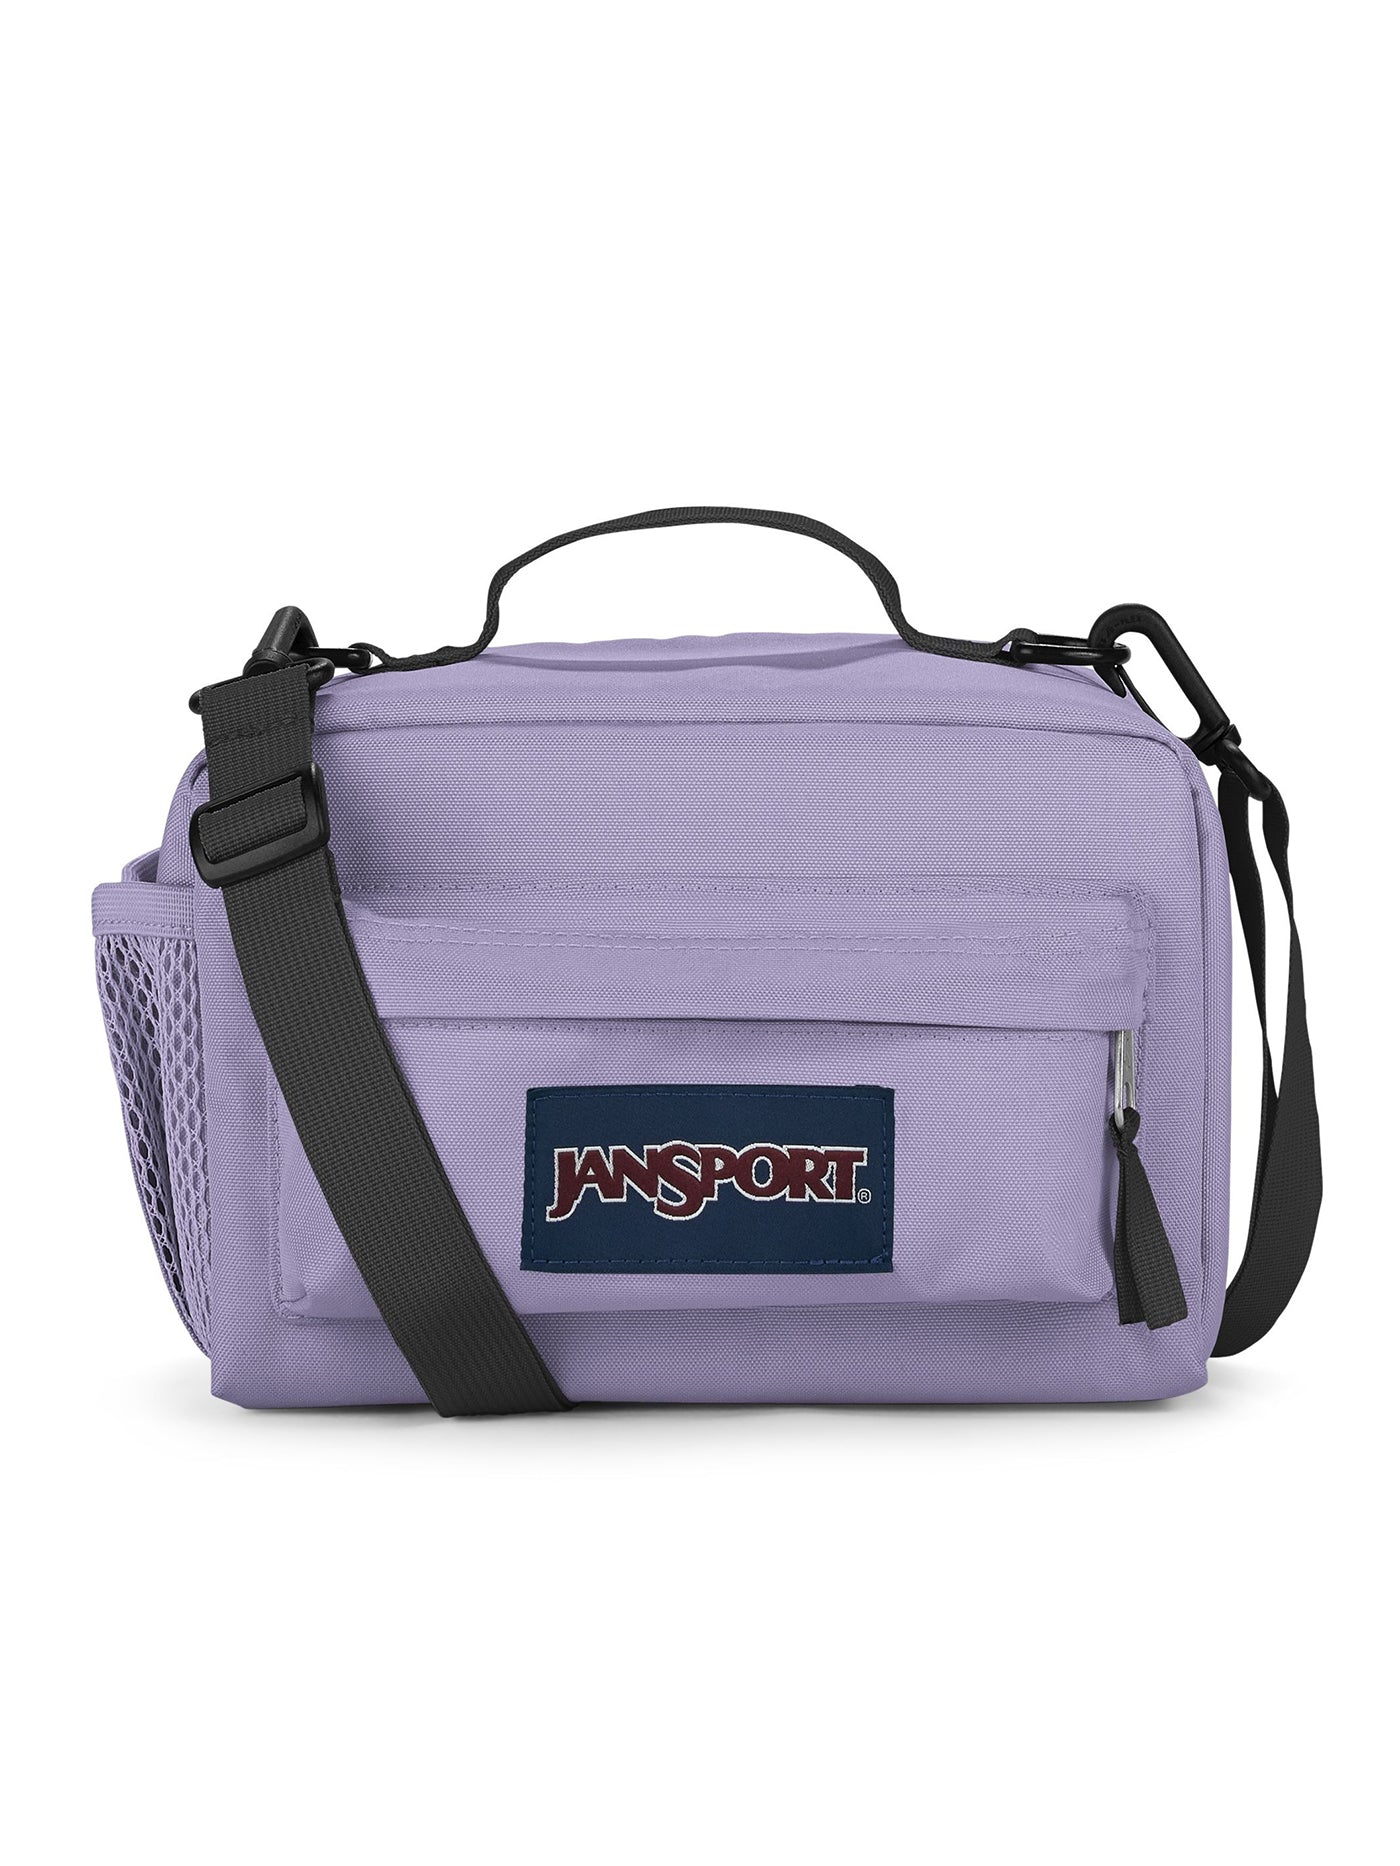 Jansport The Carryout Lunch Bag